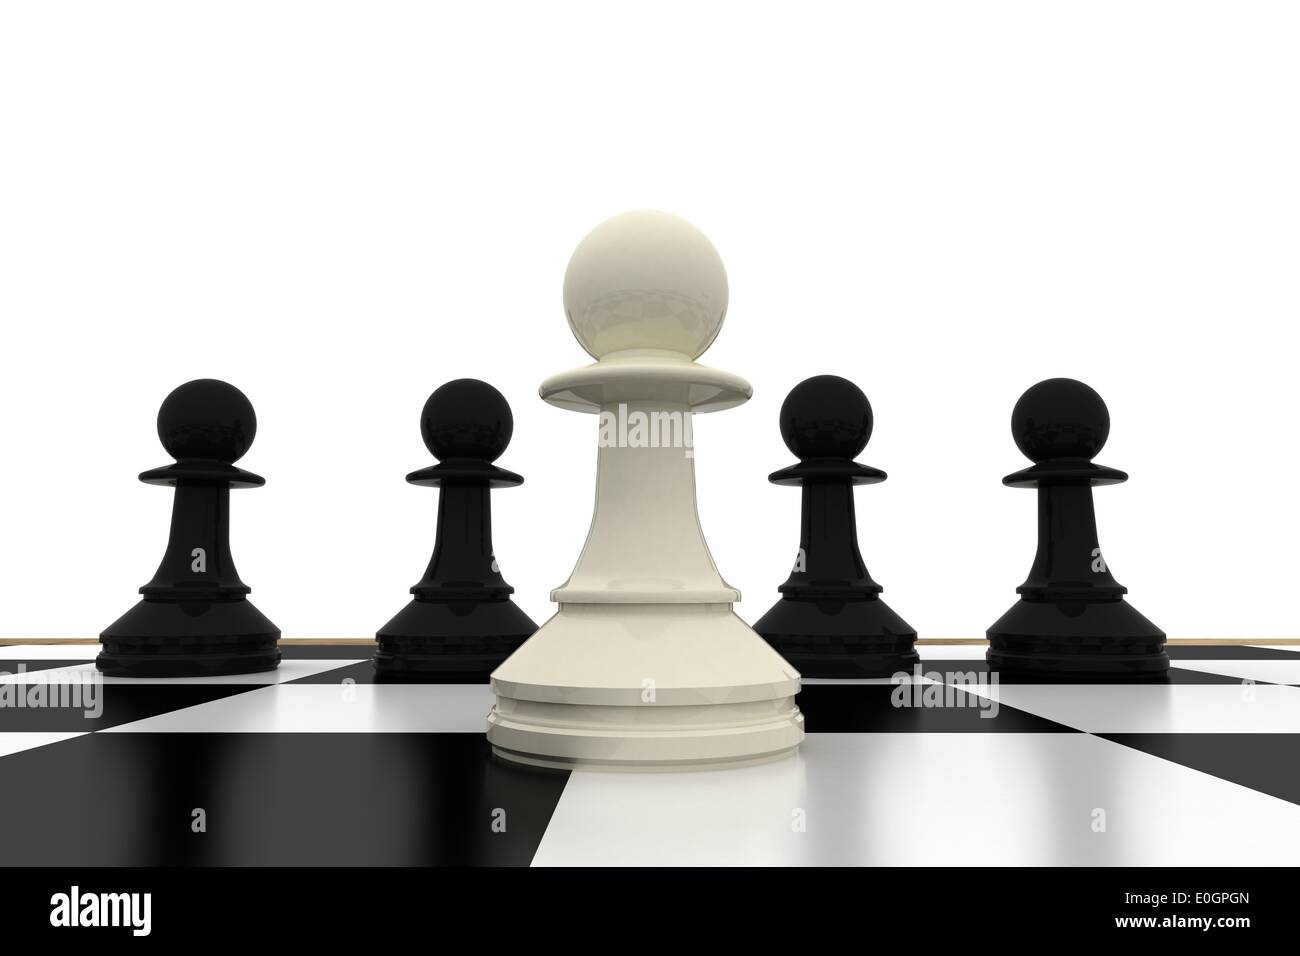 White pawn standing with black pawns Stock Photo